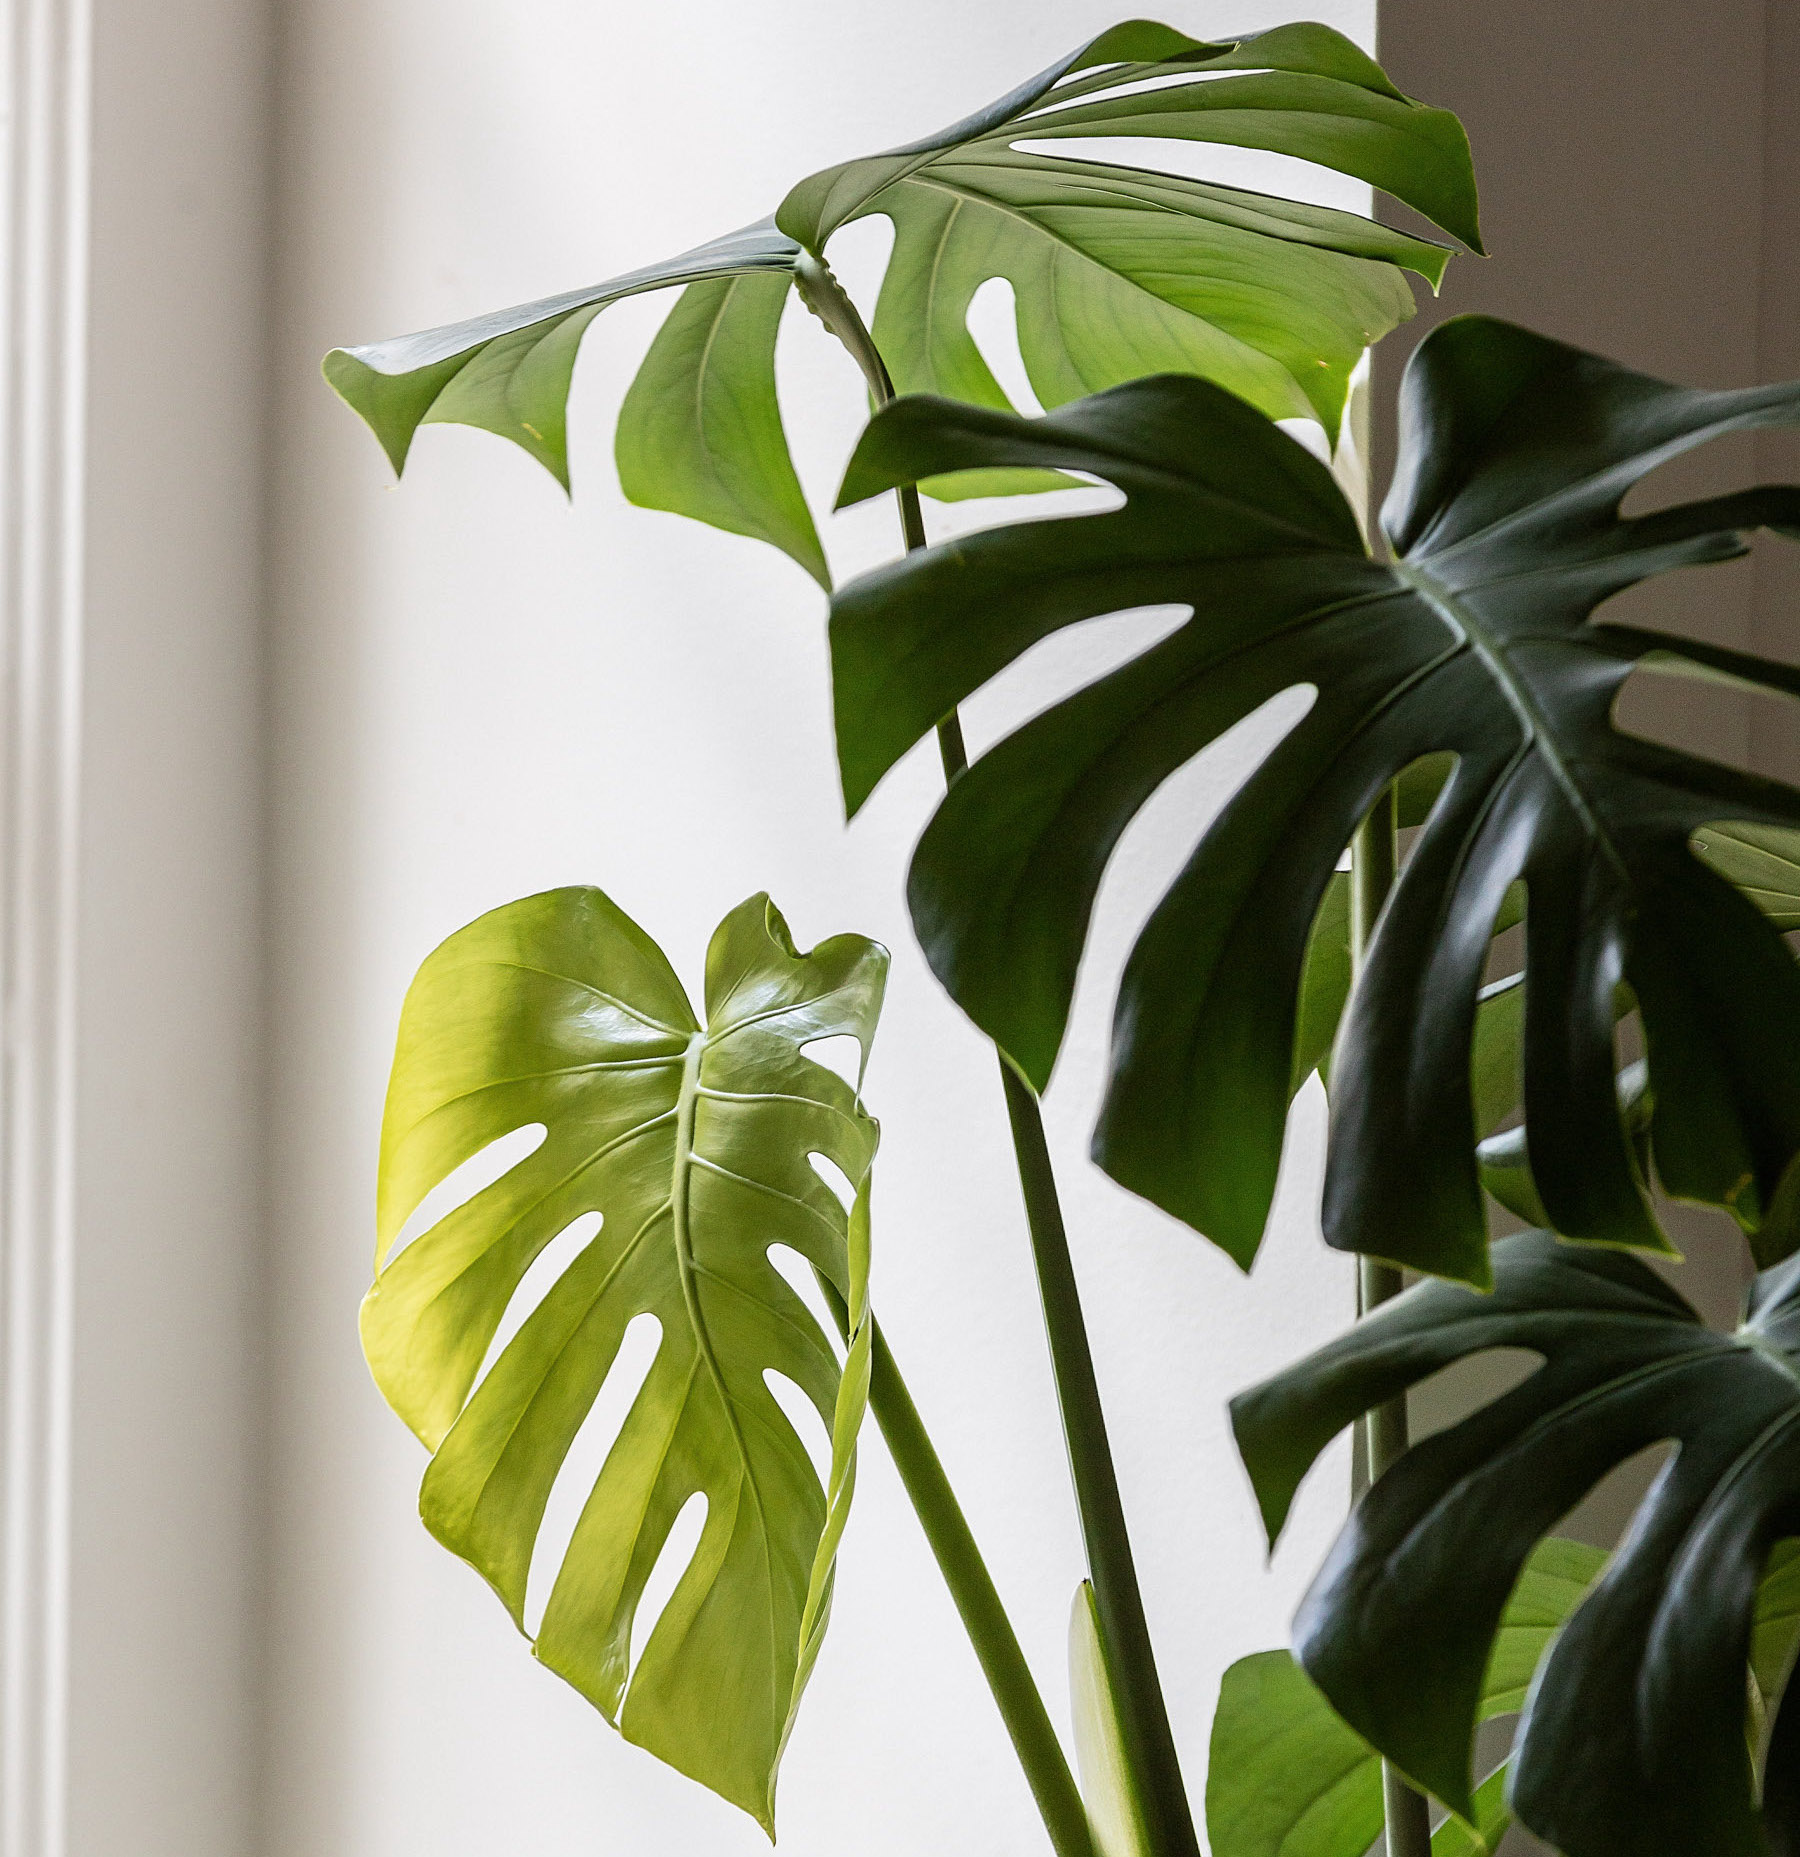 The 3 Principles of Biophilic Design  Indoor plants delivery by Leaf Envy